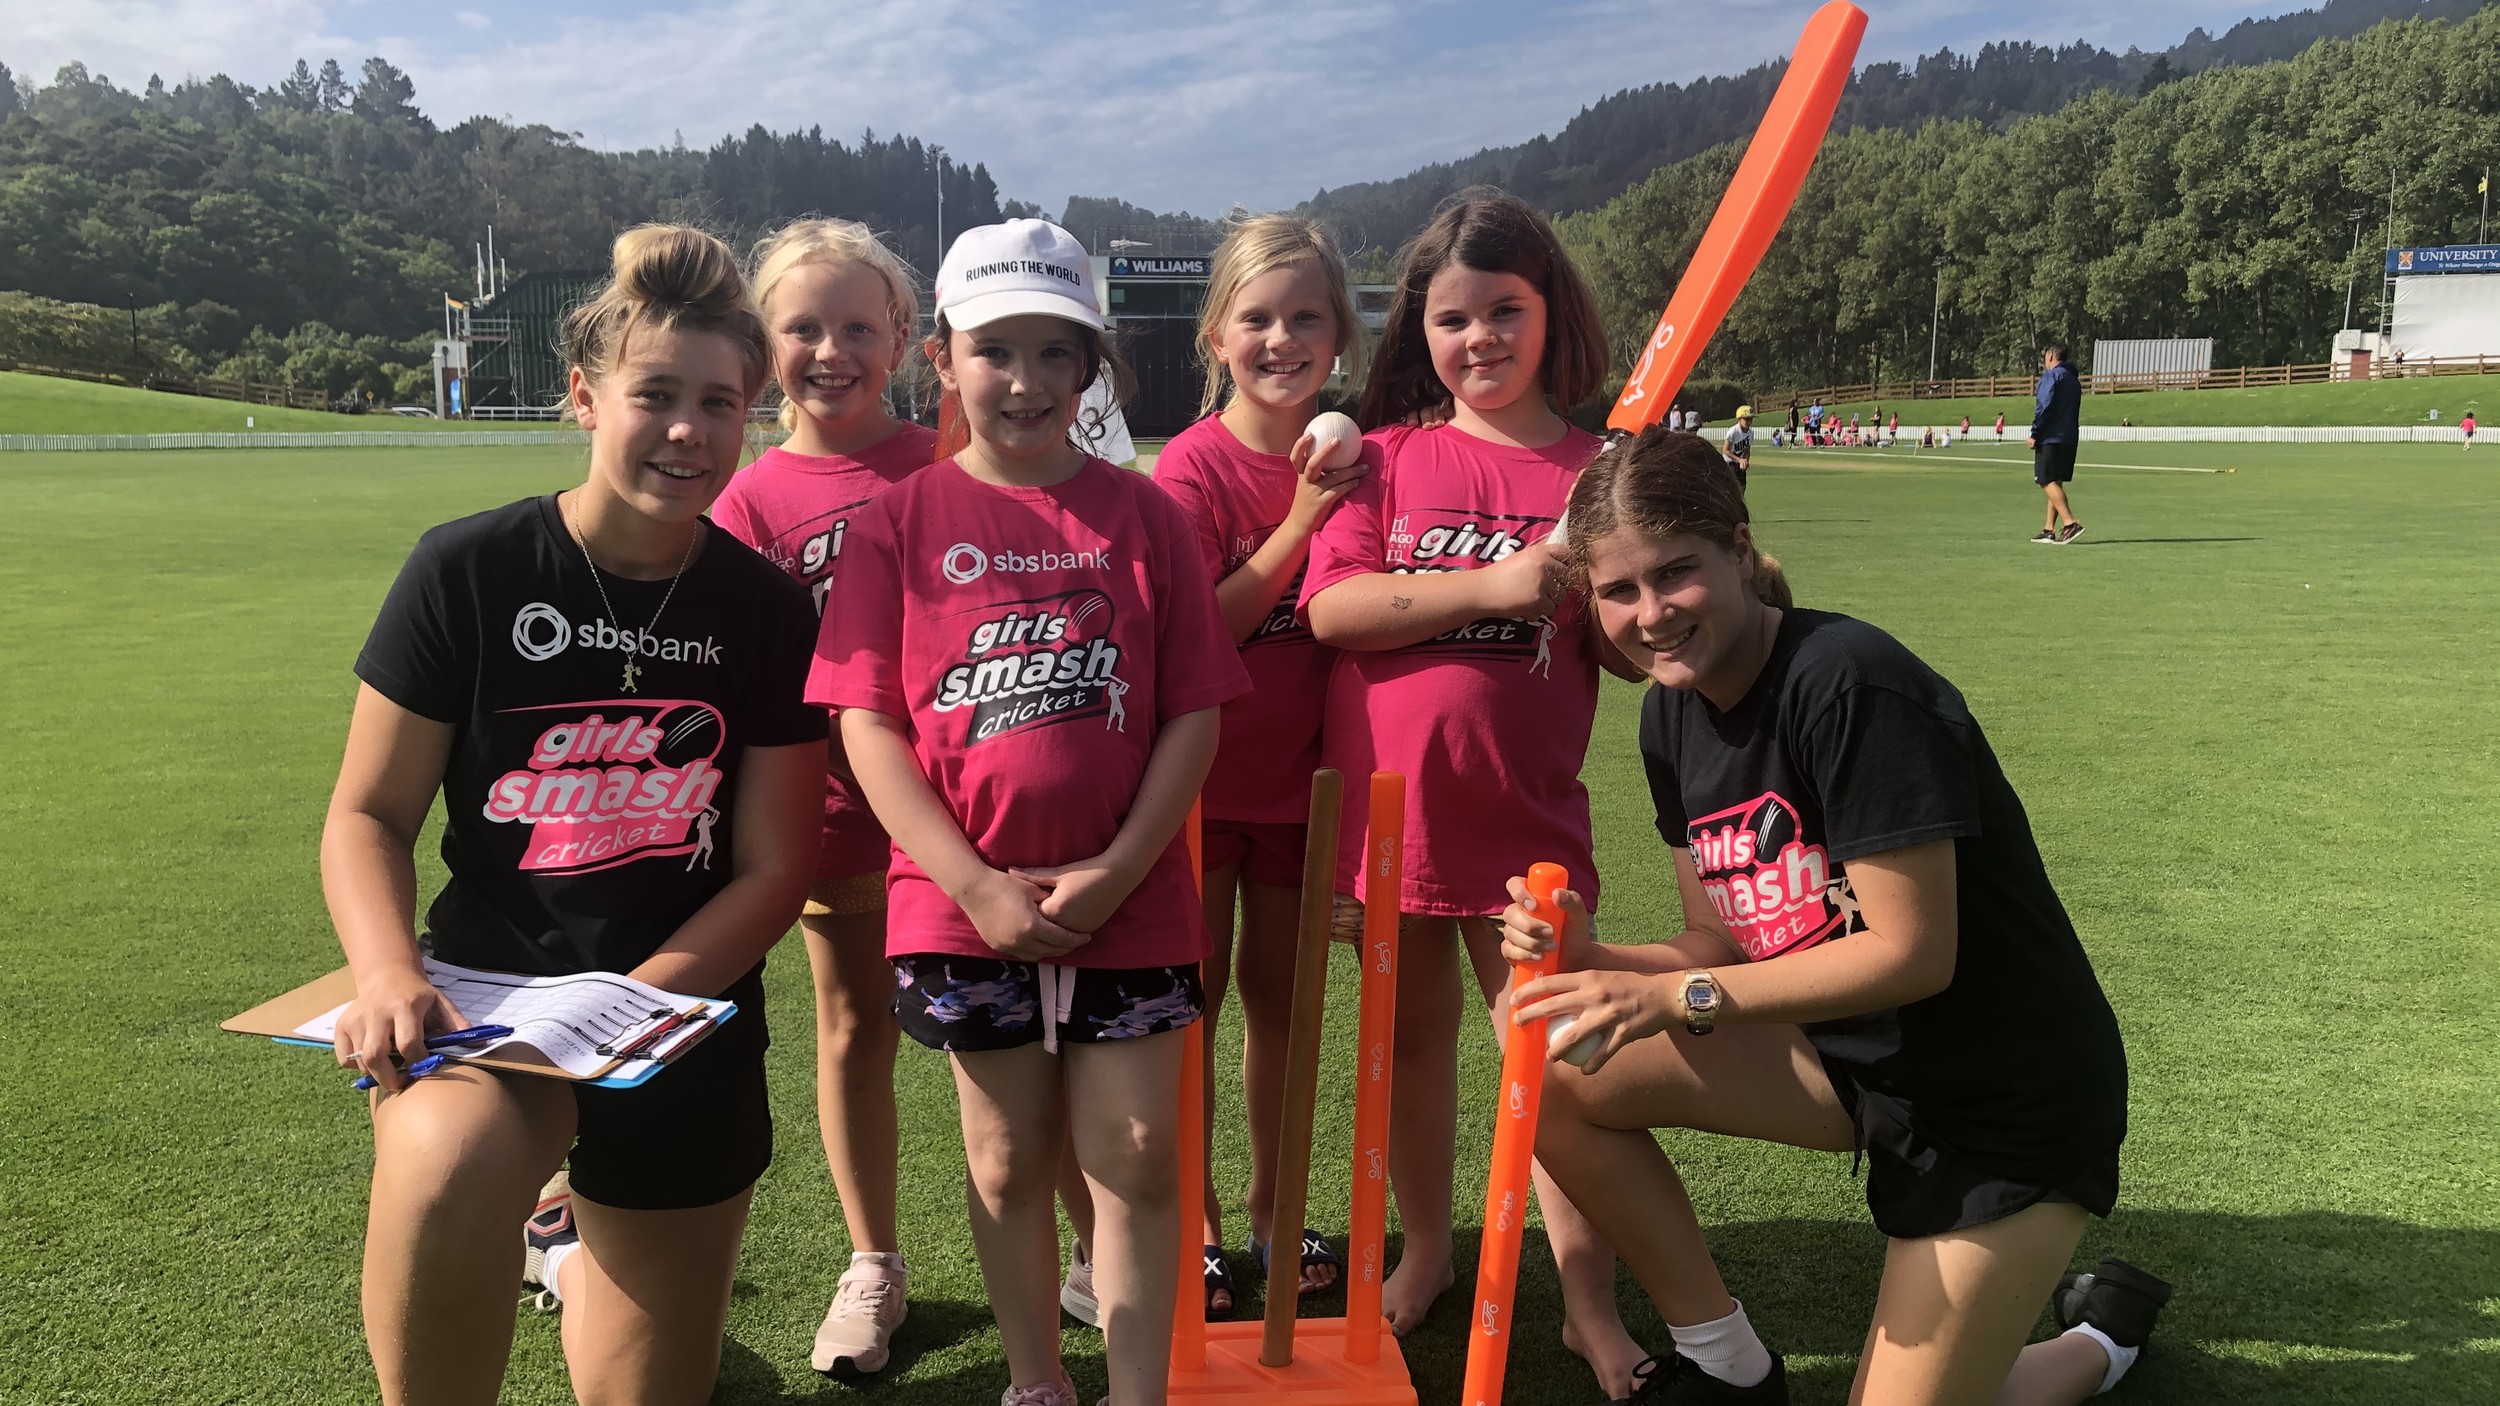 Girls Smash Modified Girls Only Cricket Programme